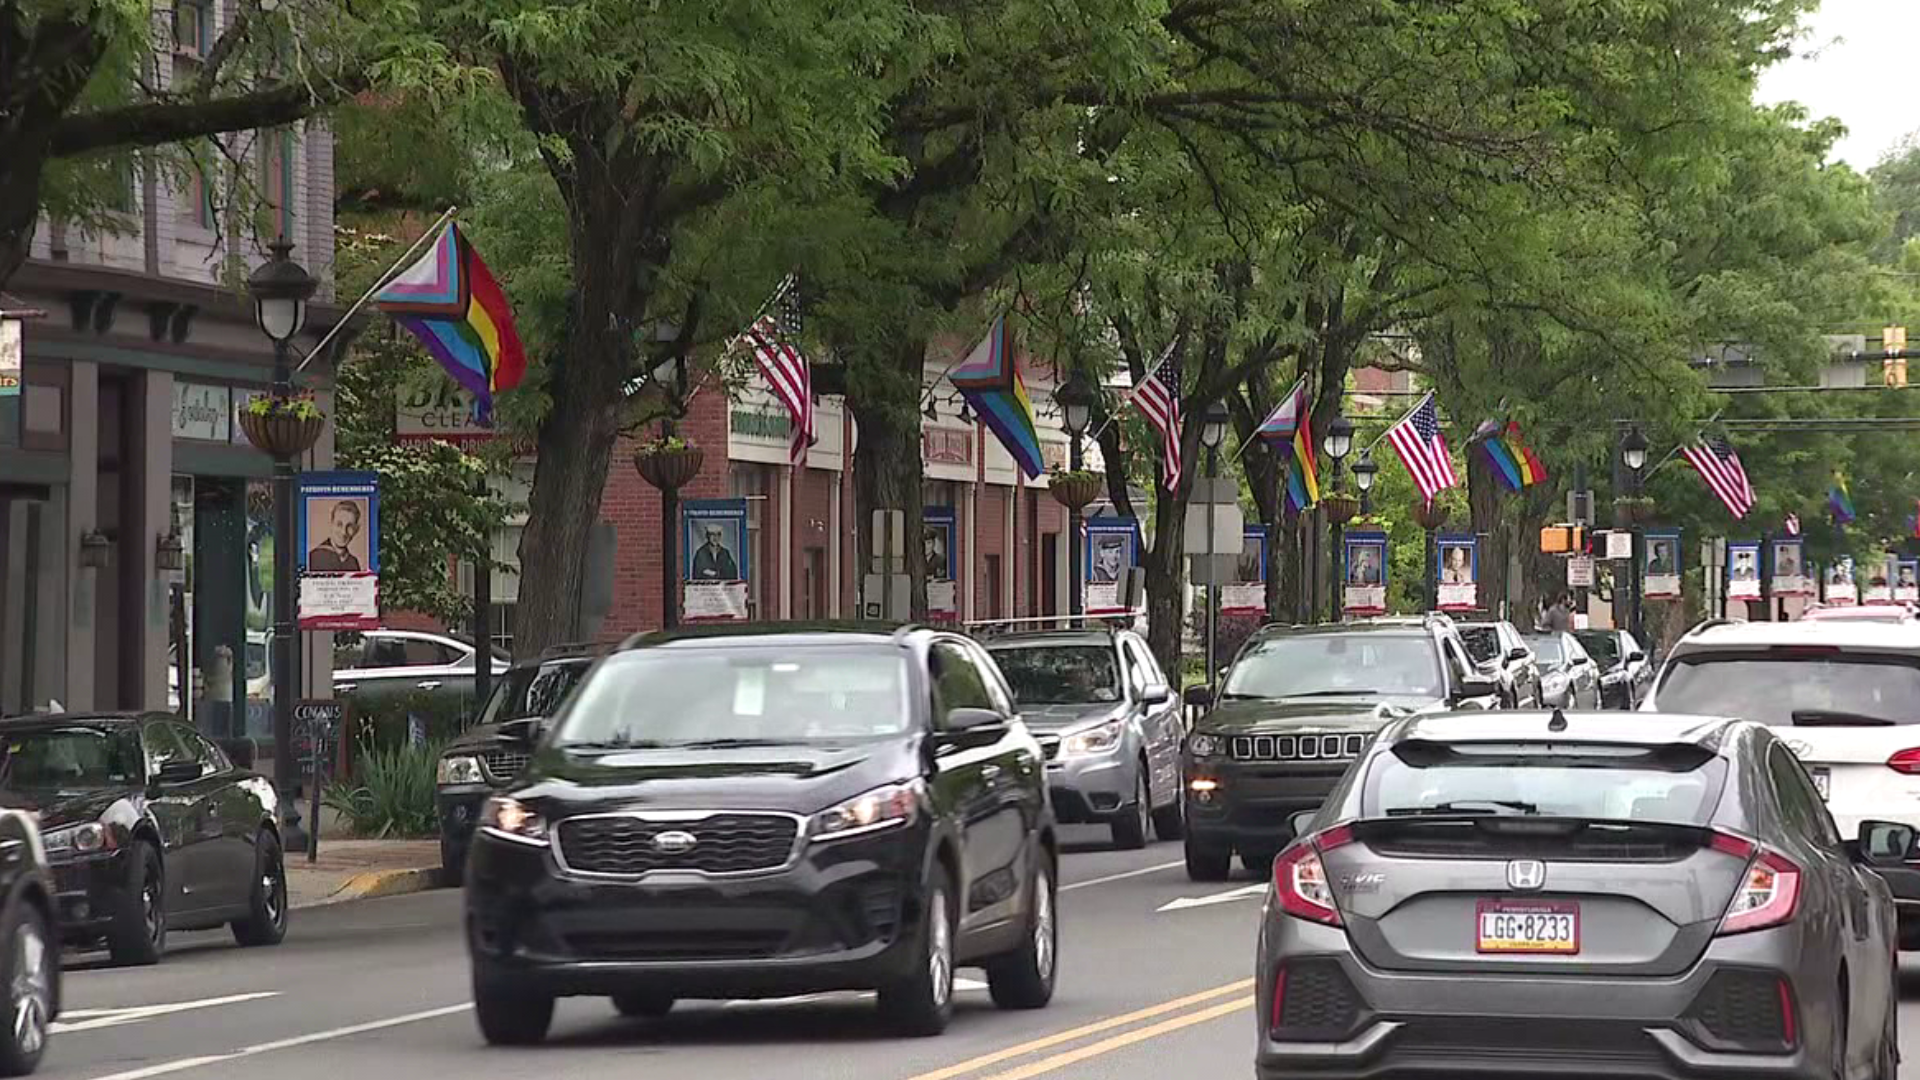 A first-of-its-kind PRIDE event will take place this weekend in the Poconos. The Pocono Pride Festival is set to take place on Sunday.